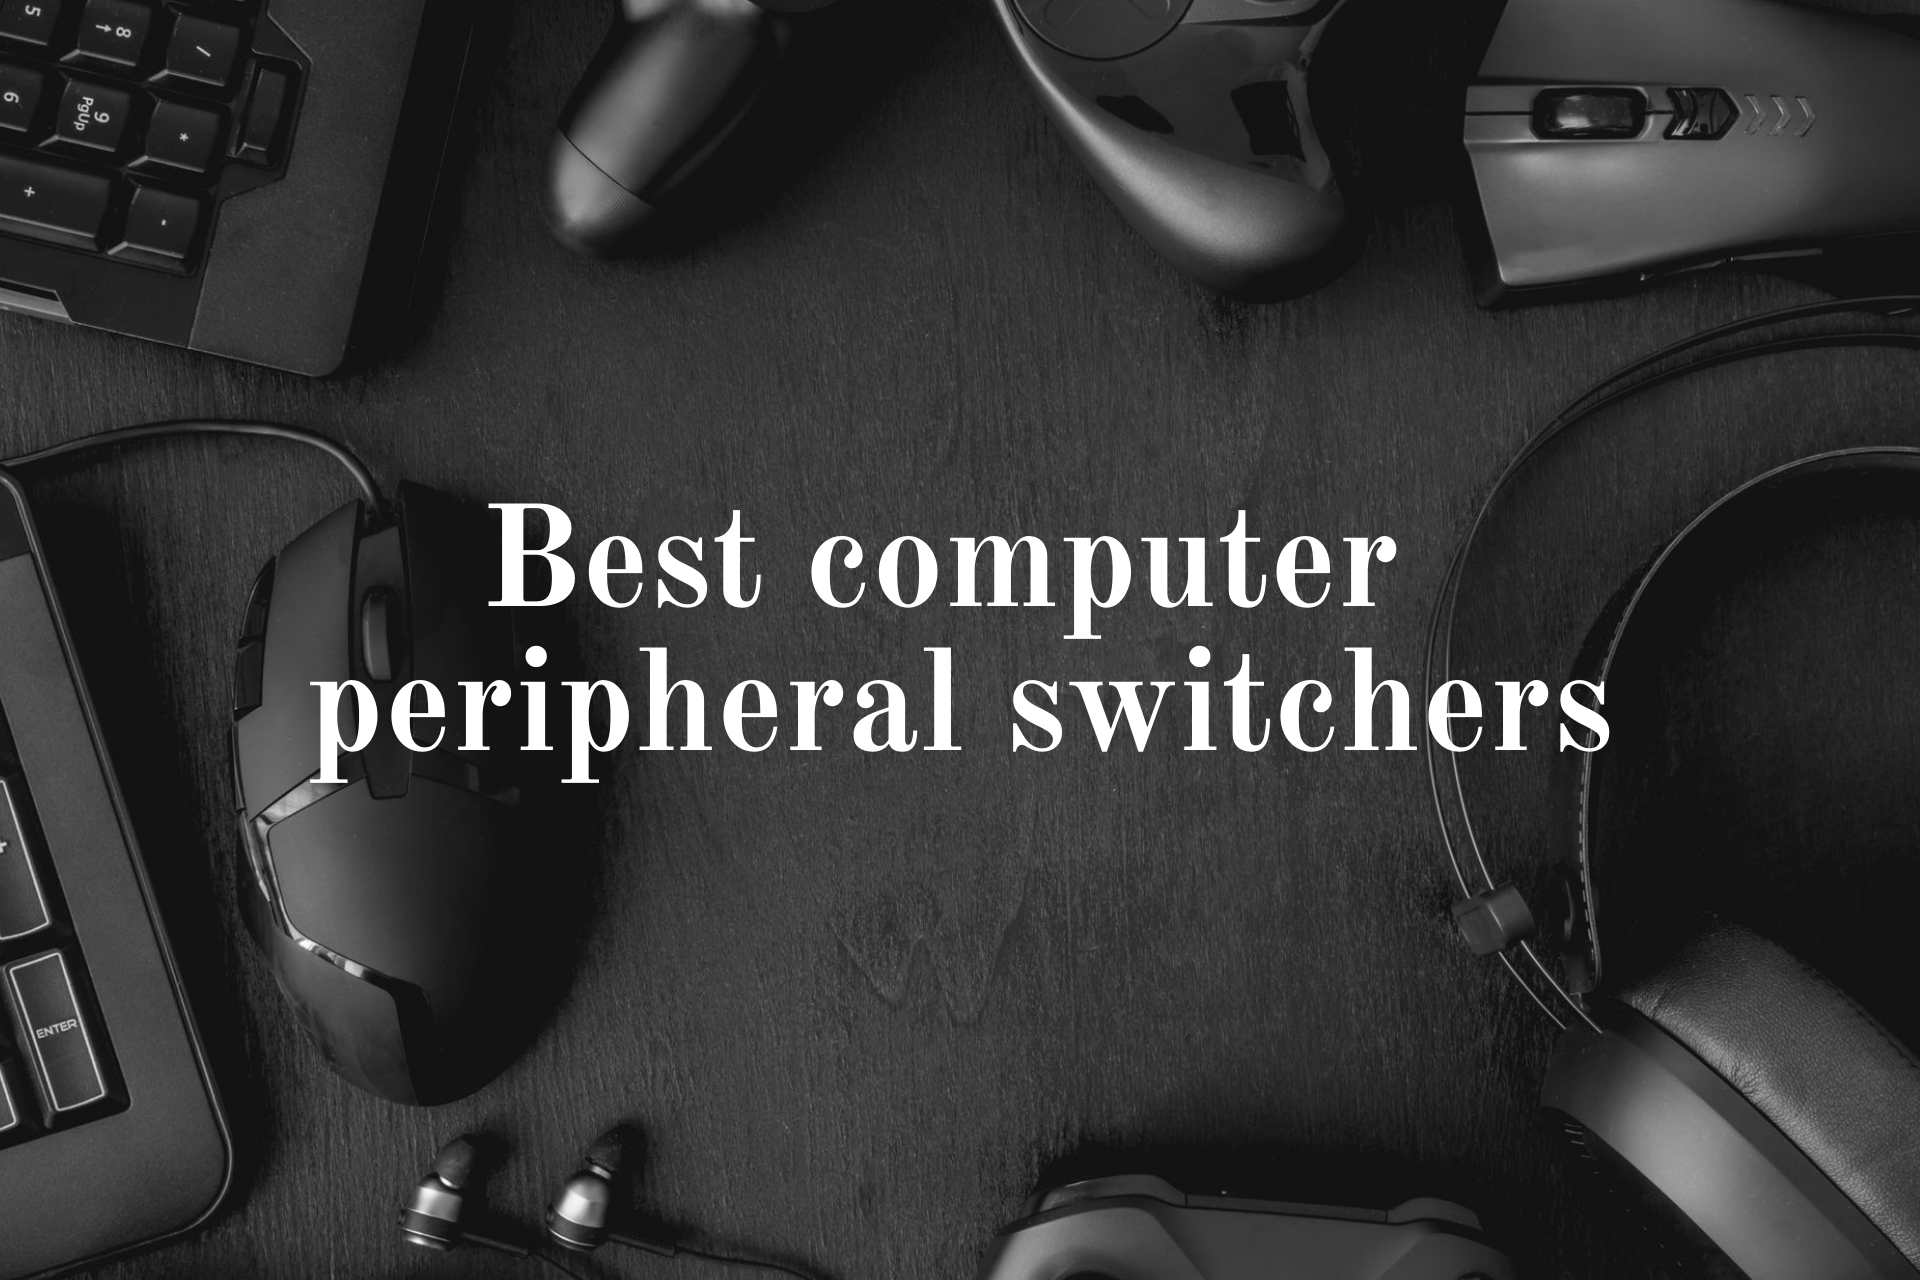 Best computer peripheral switchers